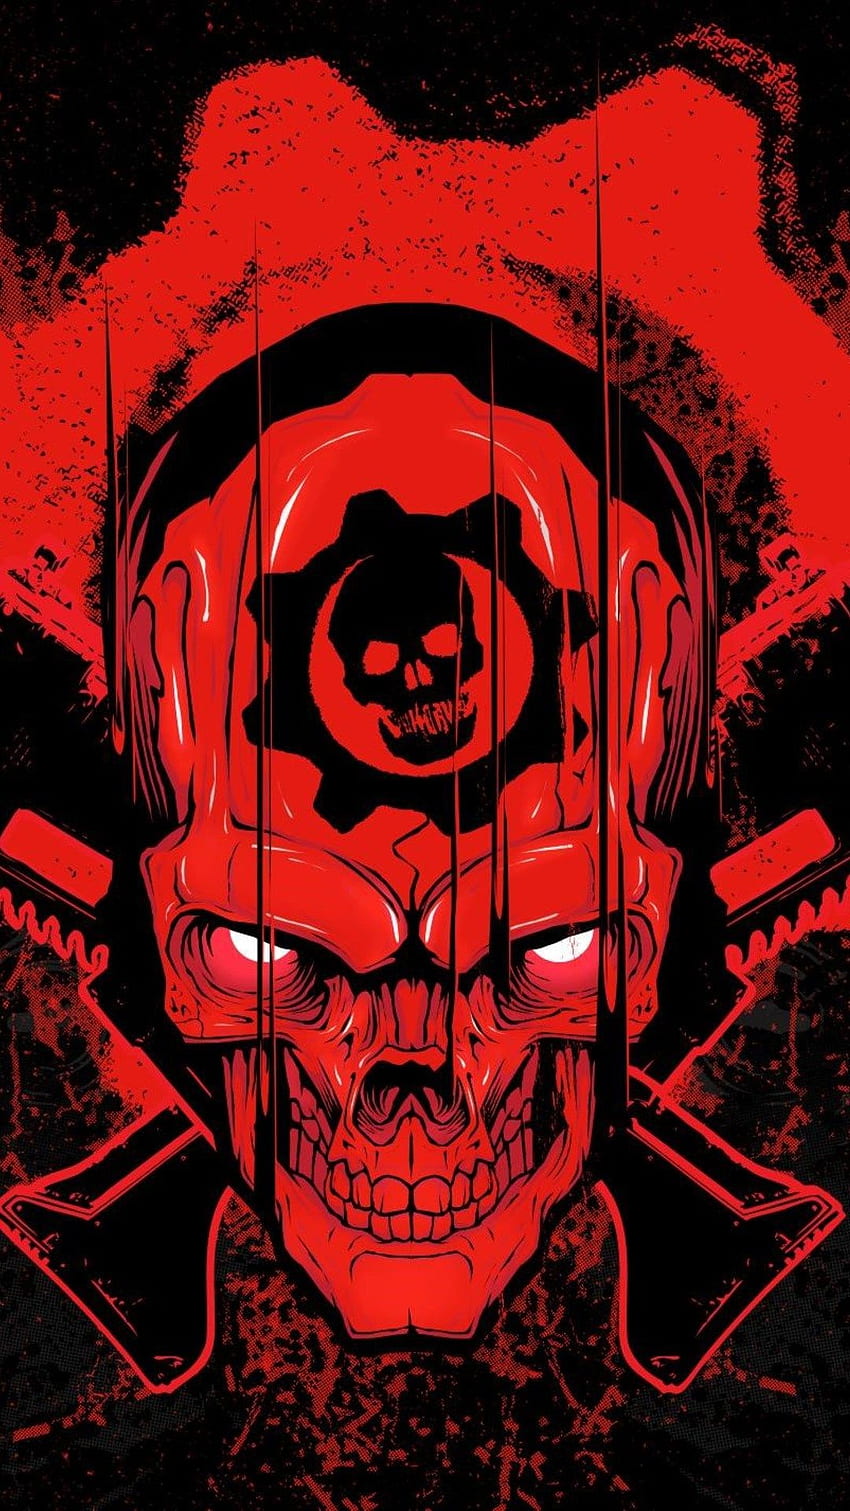 gears of war 4, xbox games, games, skull, red, black for iPhone 6, 7, 8 HD phone wallpaper